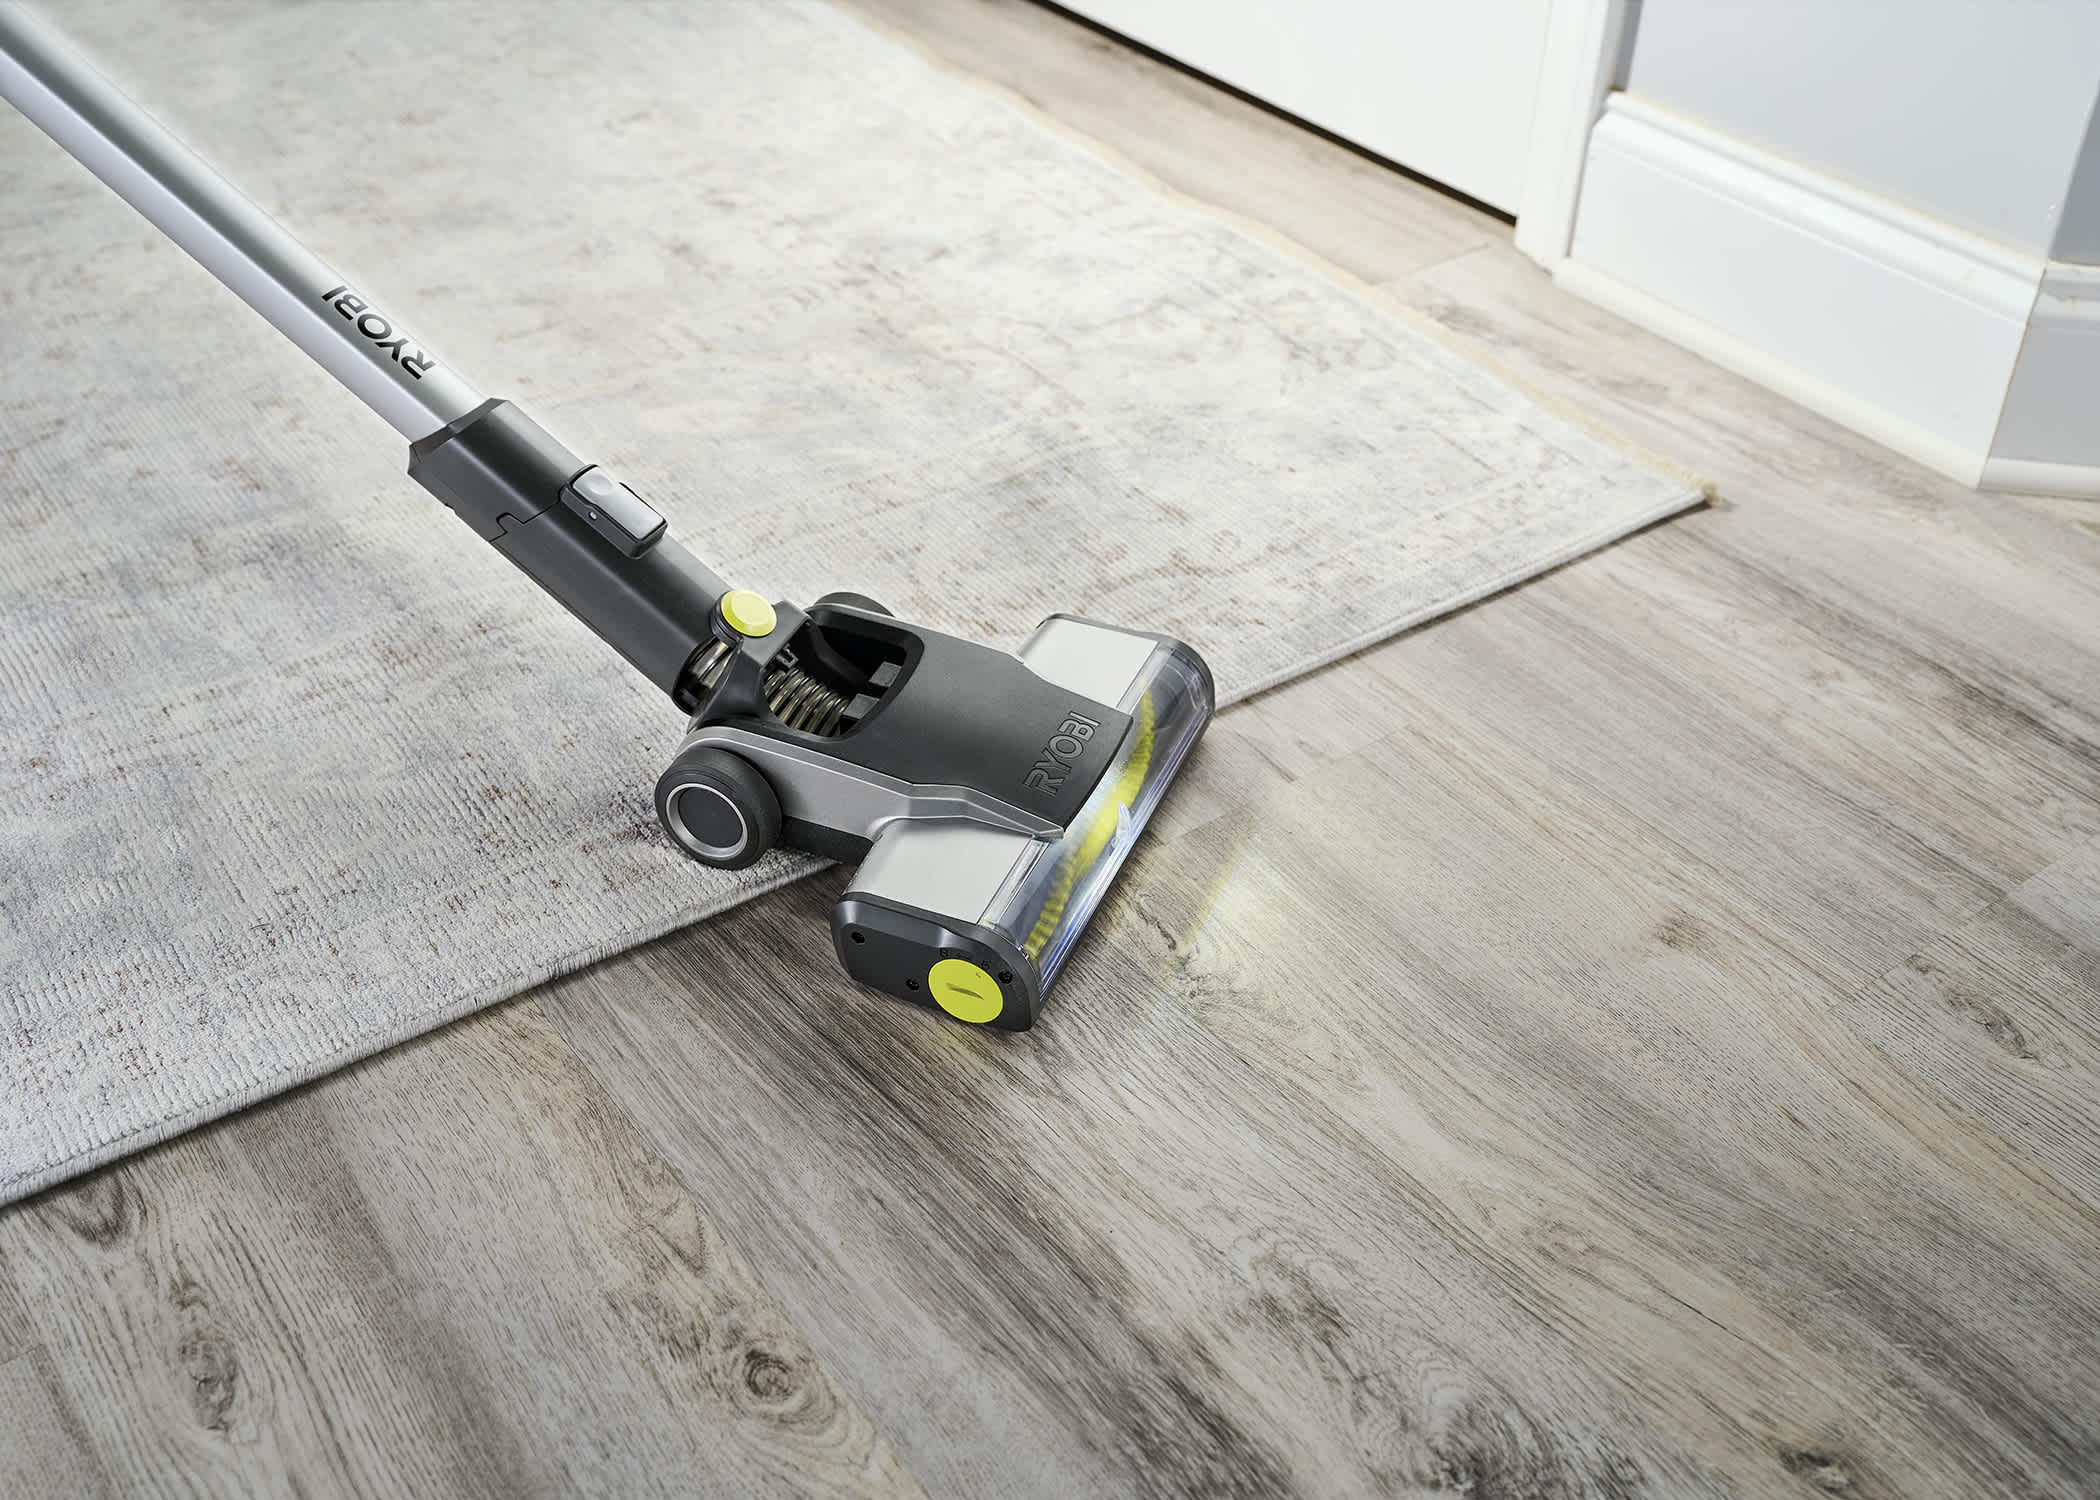 Product Features Image for 18V ONE+ CORDLESS STICK VAC.